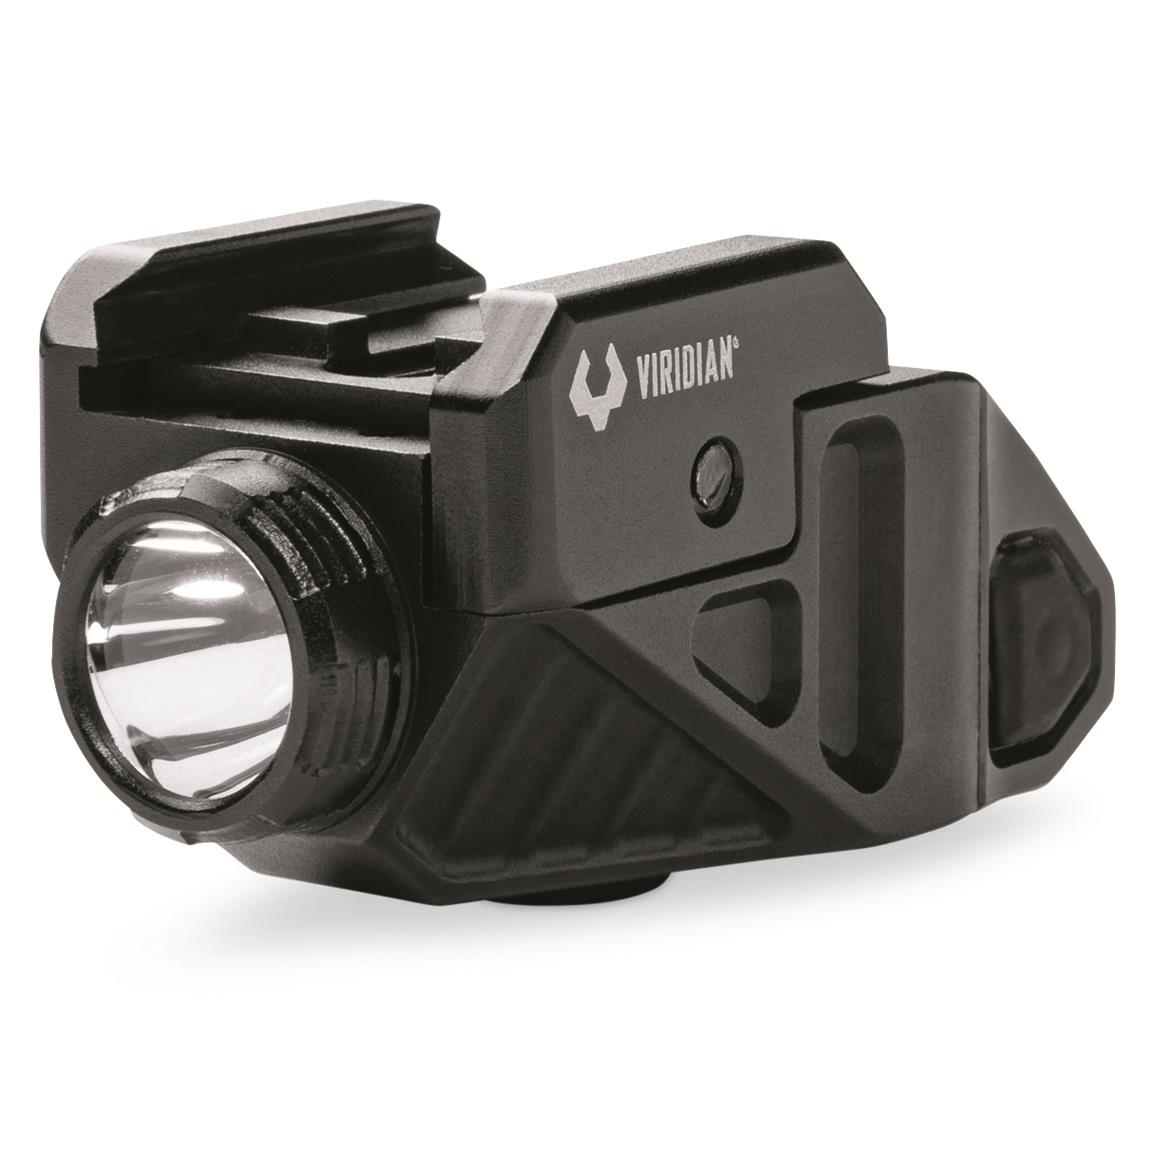 Viridian CTL Universal Tactical Light with Rechargeable Battery